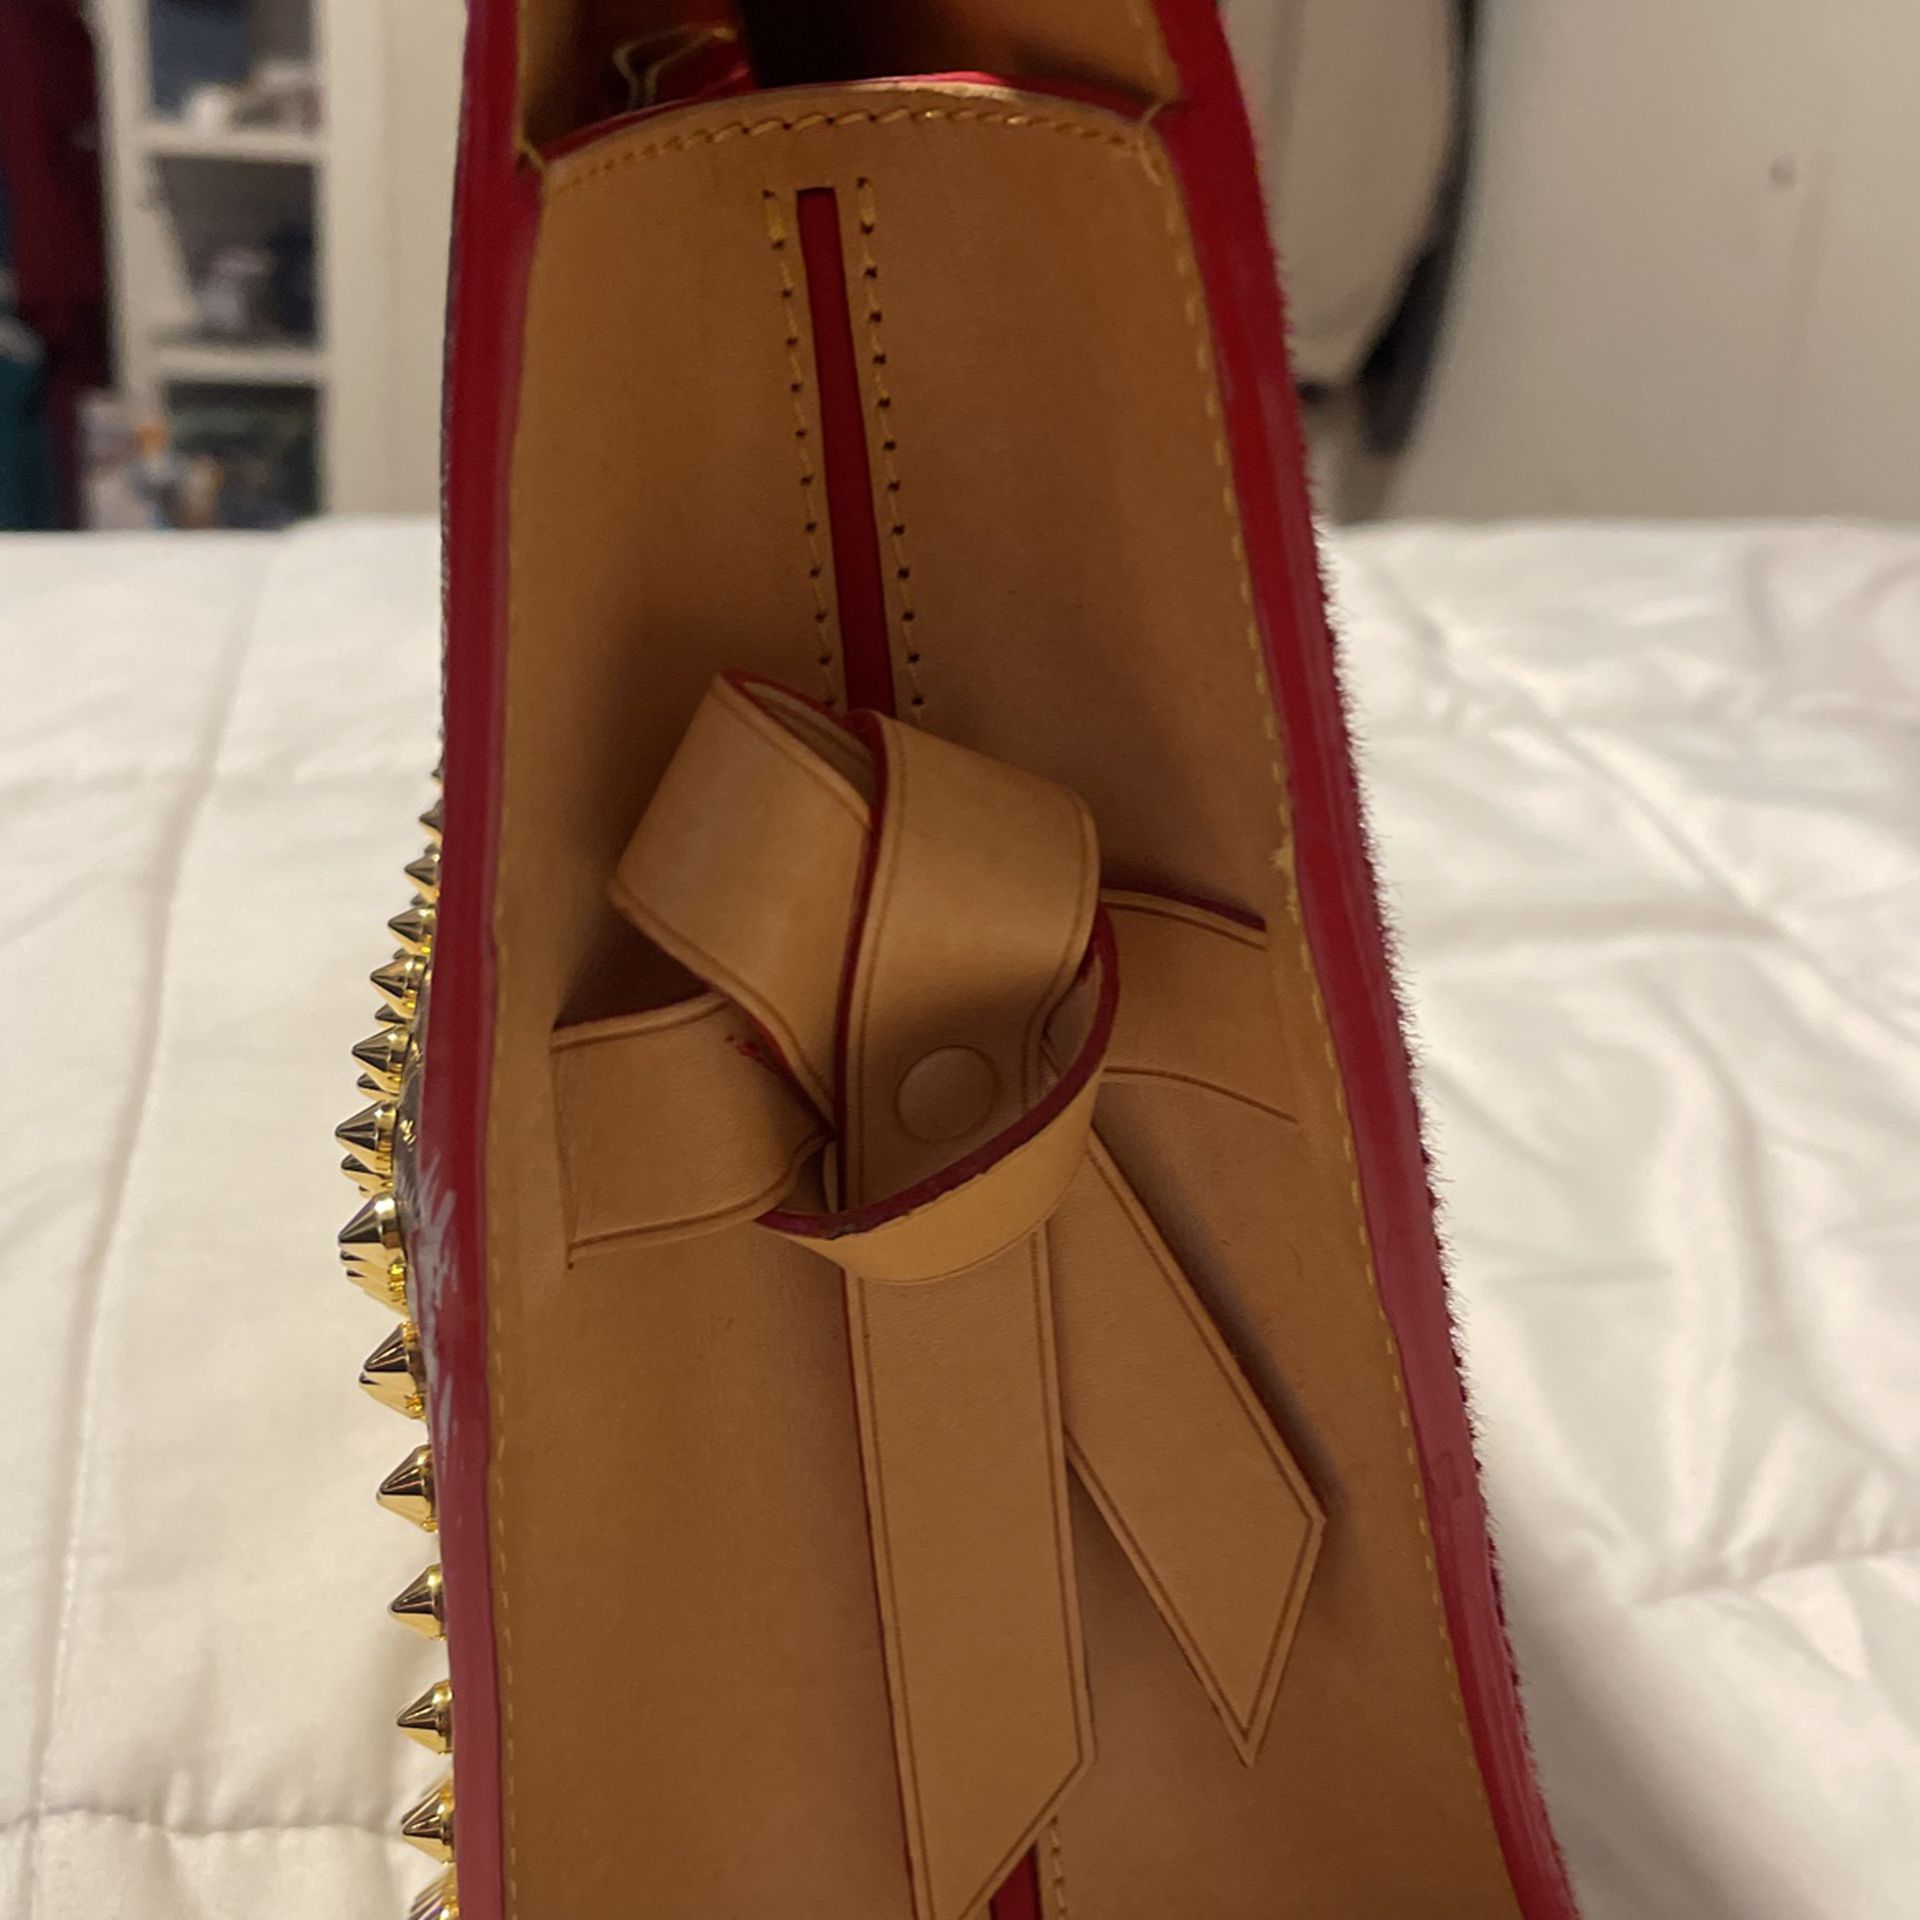 Louis Vuitton - Louboutin Collaboration - Tote Studded - Pre-Loved